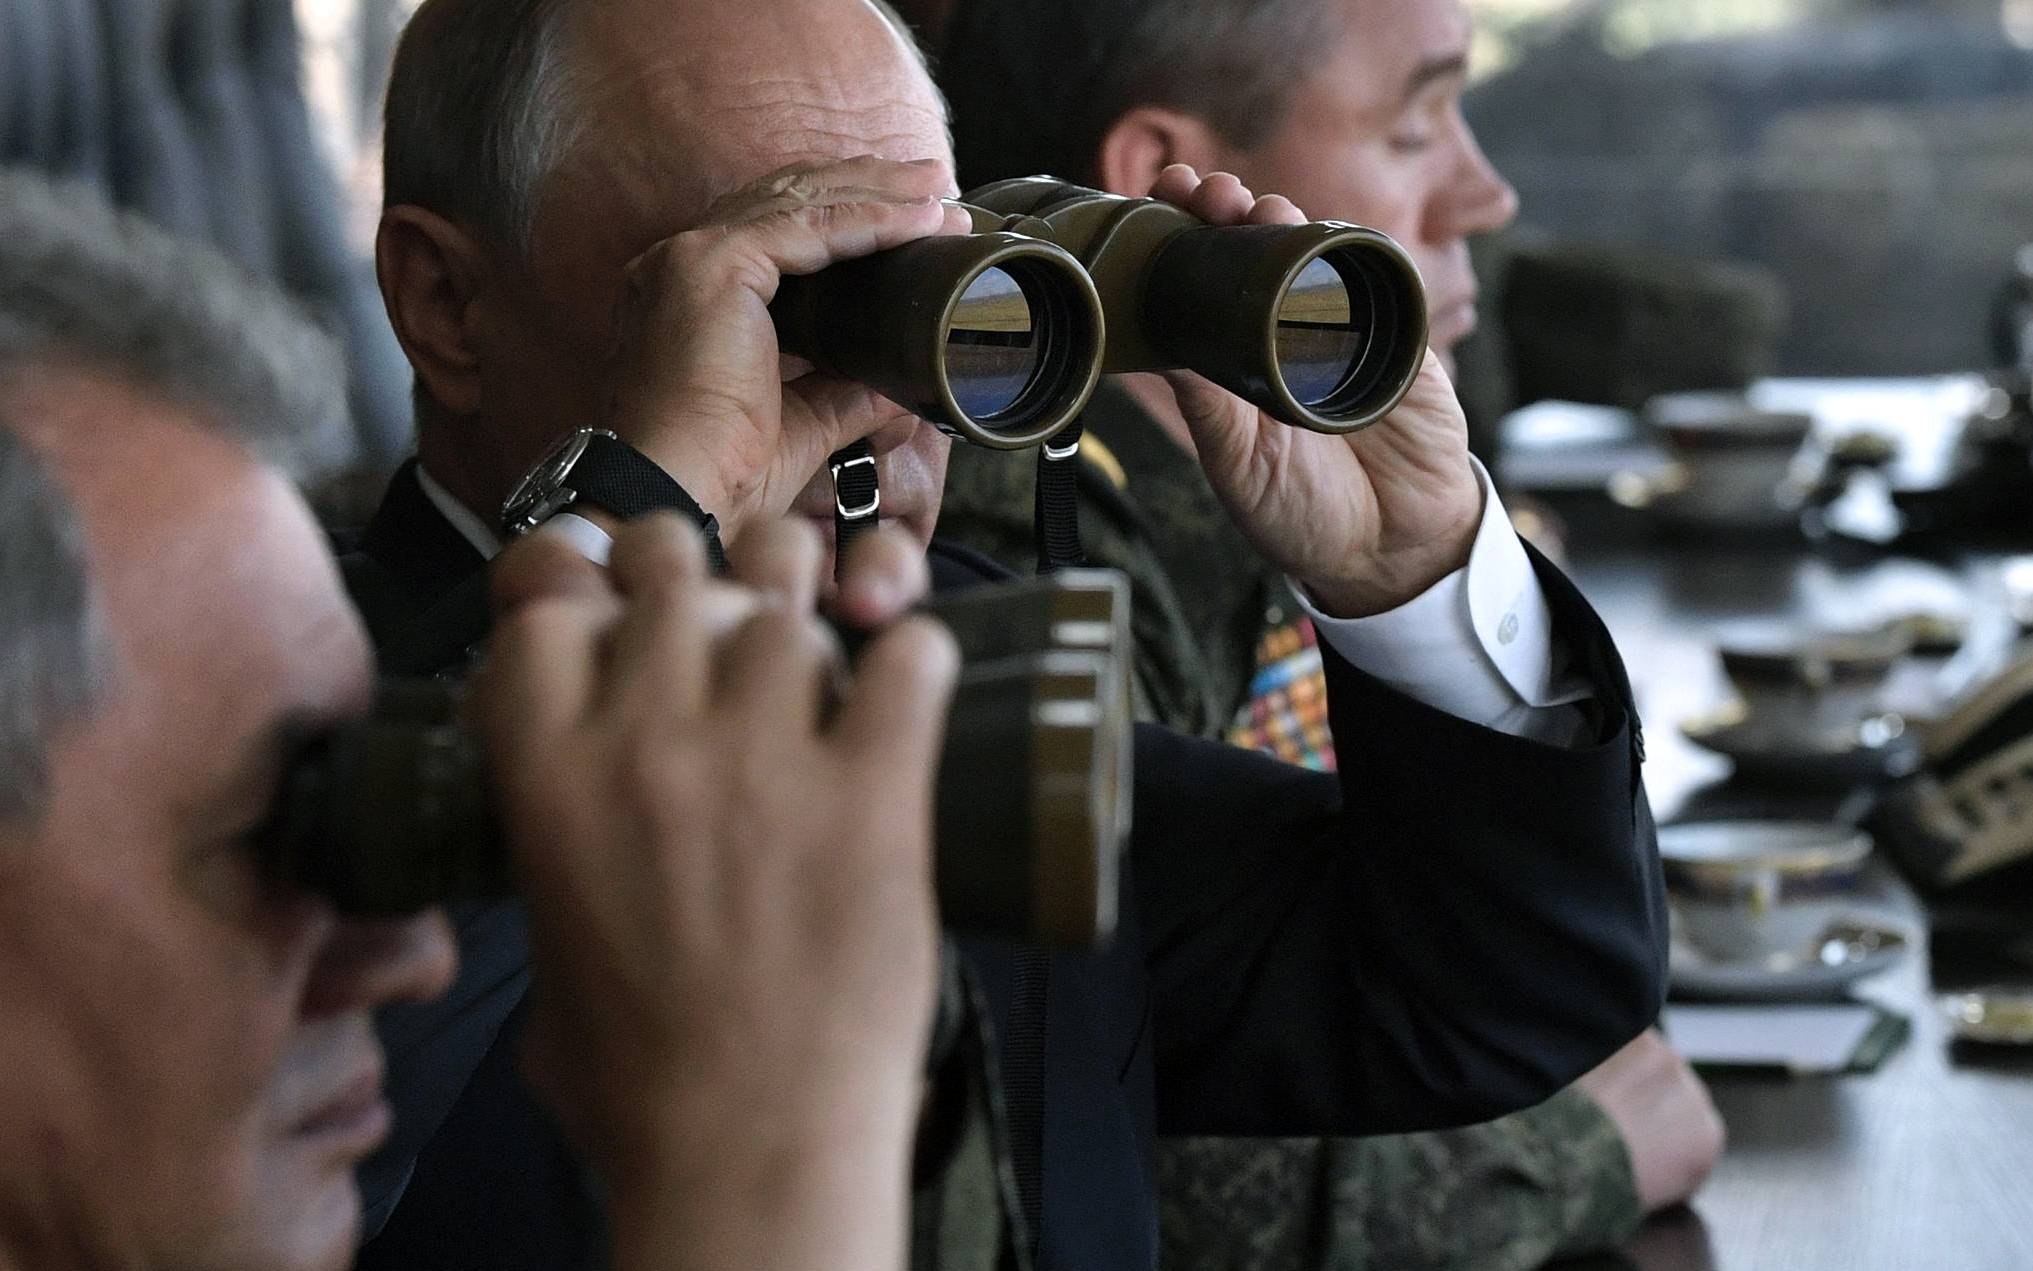 Russia's President Vladimir Putin (C), Defence Minister Sergei Shoigu (L) and Chief of the General Staff of the Russian Armed Forces Valery Gerasimov watch the Vostok-2018 (East-2018) military drills at Tsugol training ground not far from the Chinese and Mongolian border in Siberia, on September 13, 2018. (Photo by Alexey NIKOLSKY / SPUTNIK / AFP)